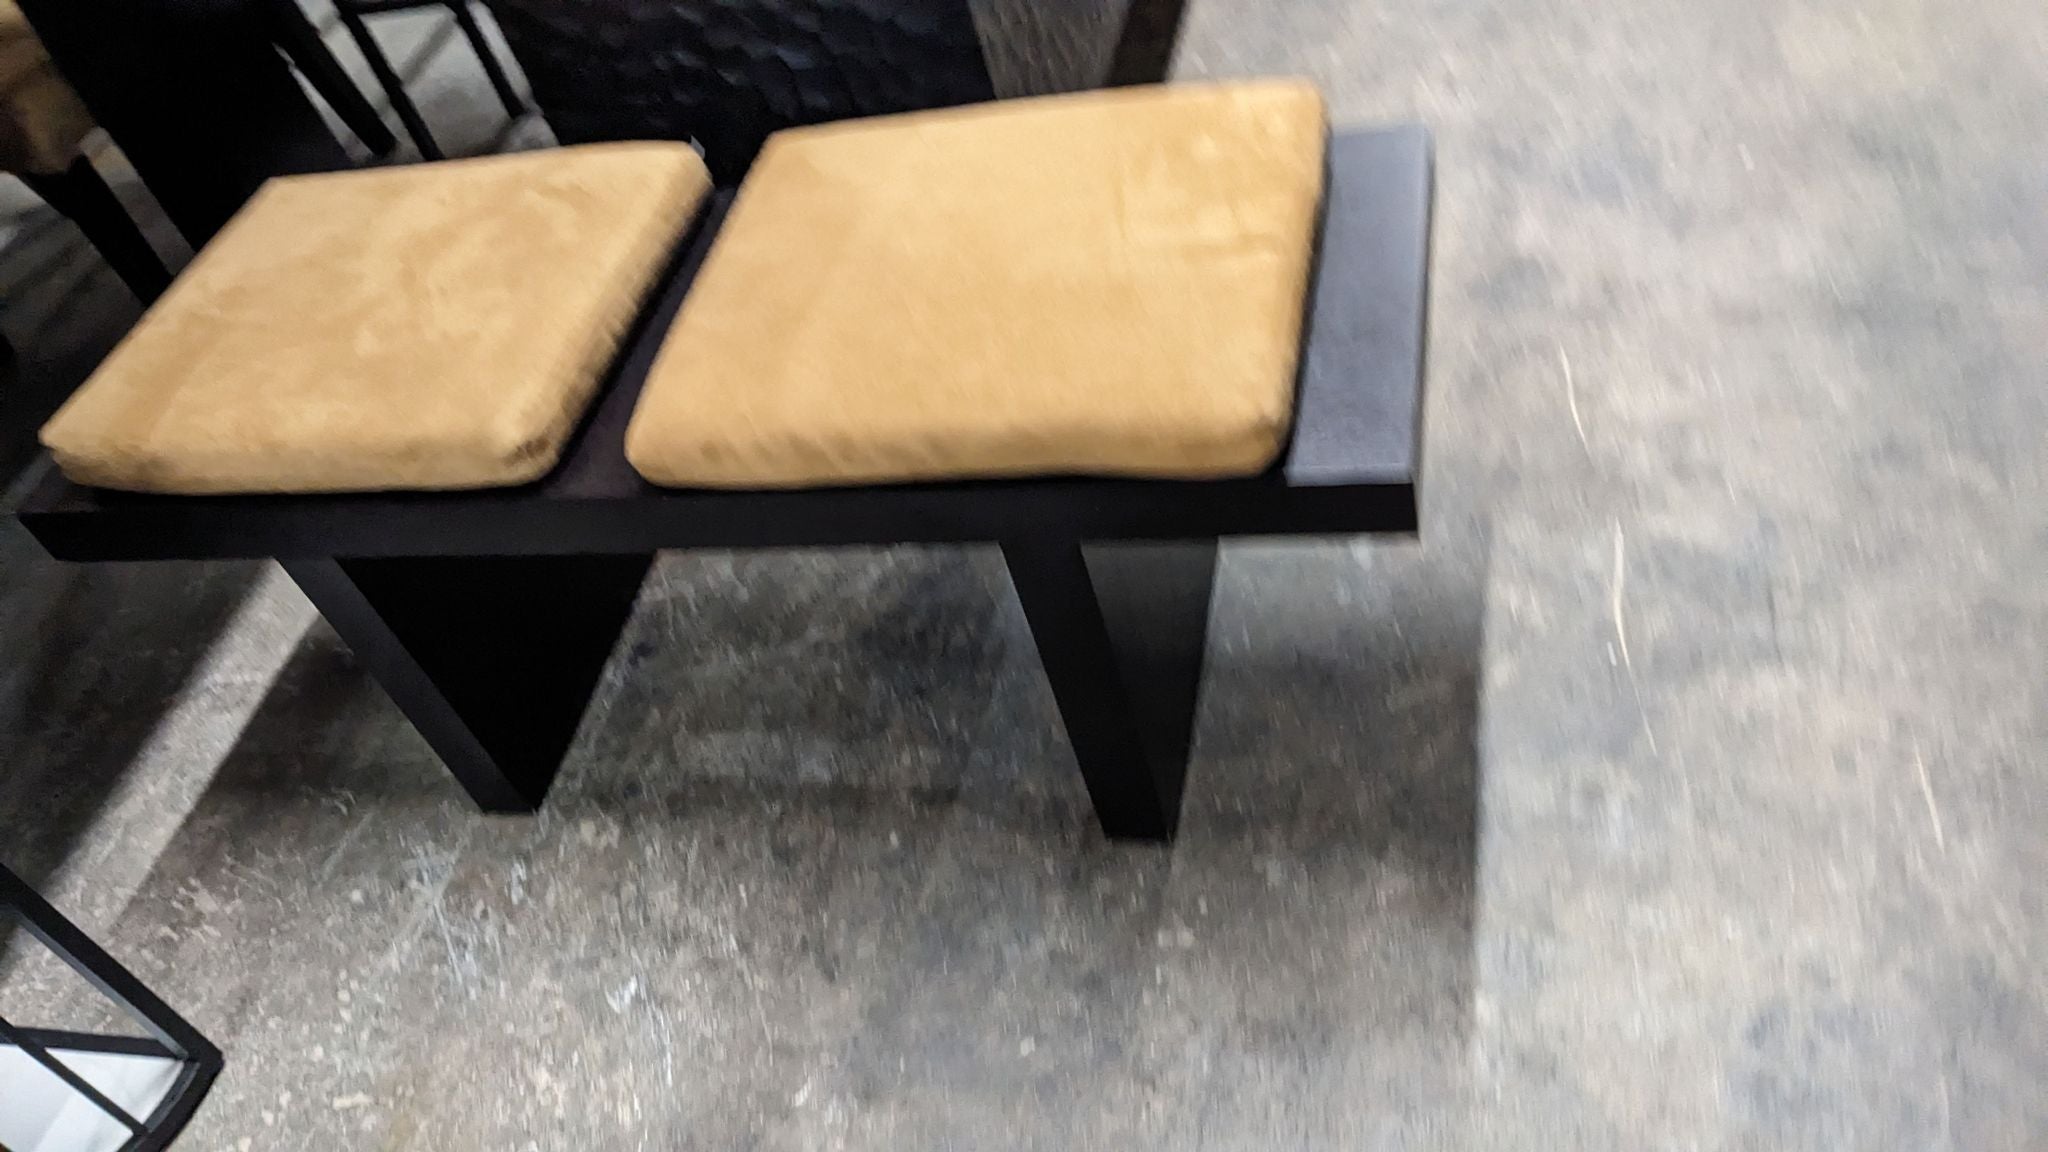 Alt text 1: A modern Reperch bench with two golden tan cushions on a black base, displayed in a furniture store.